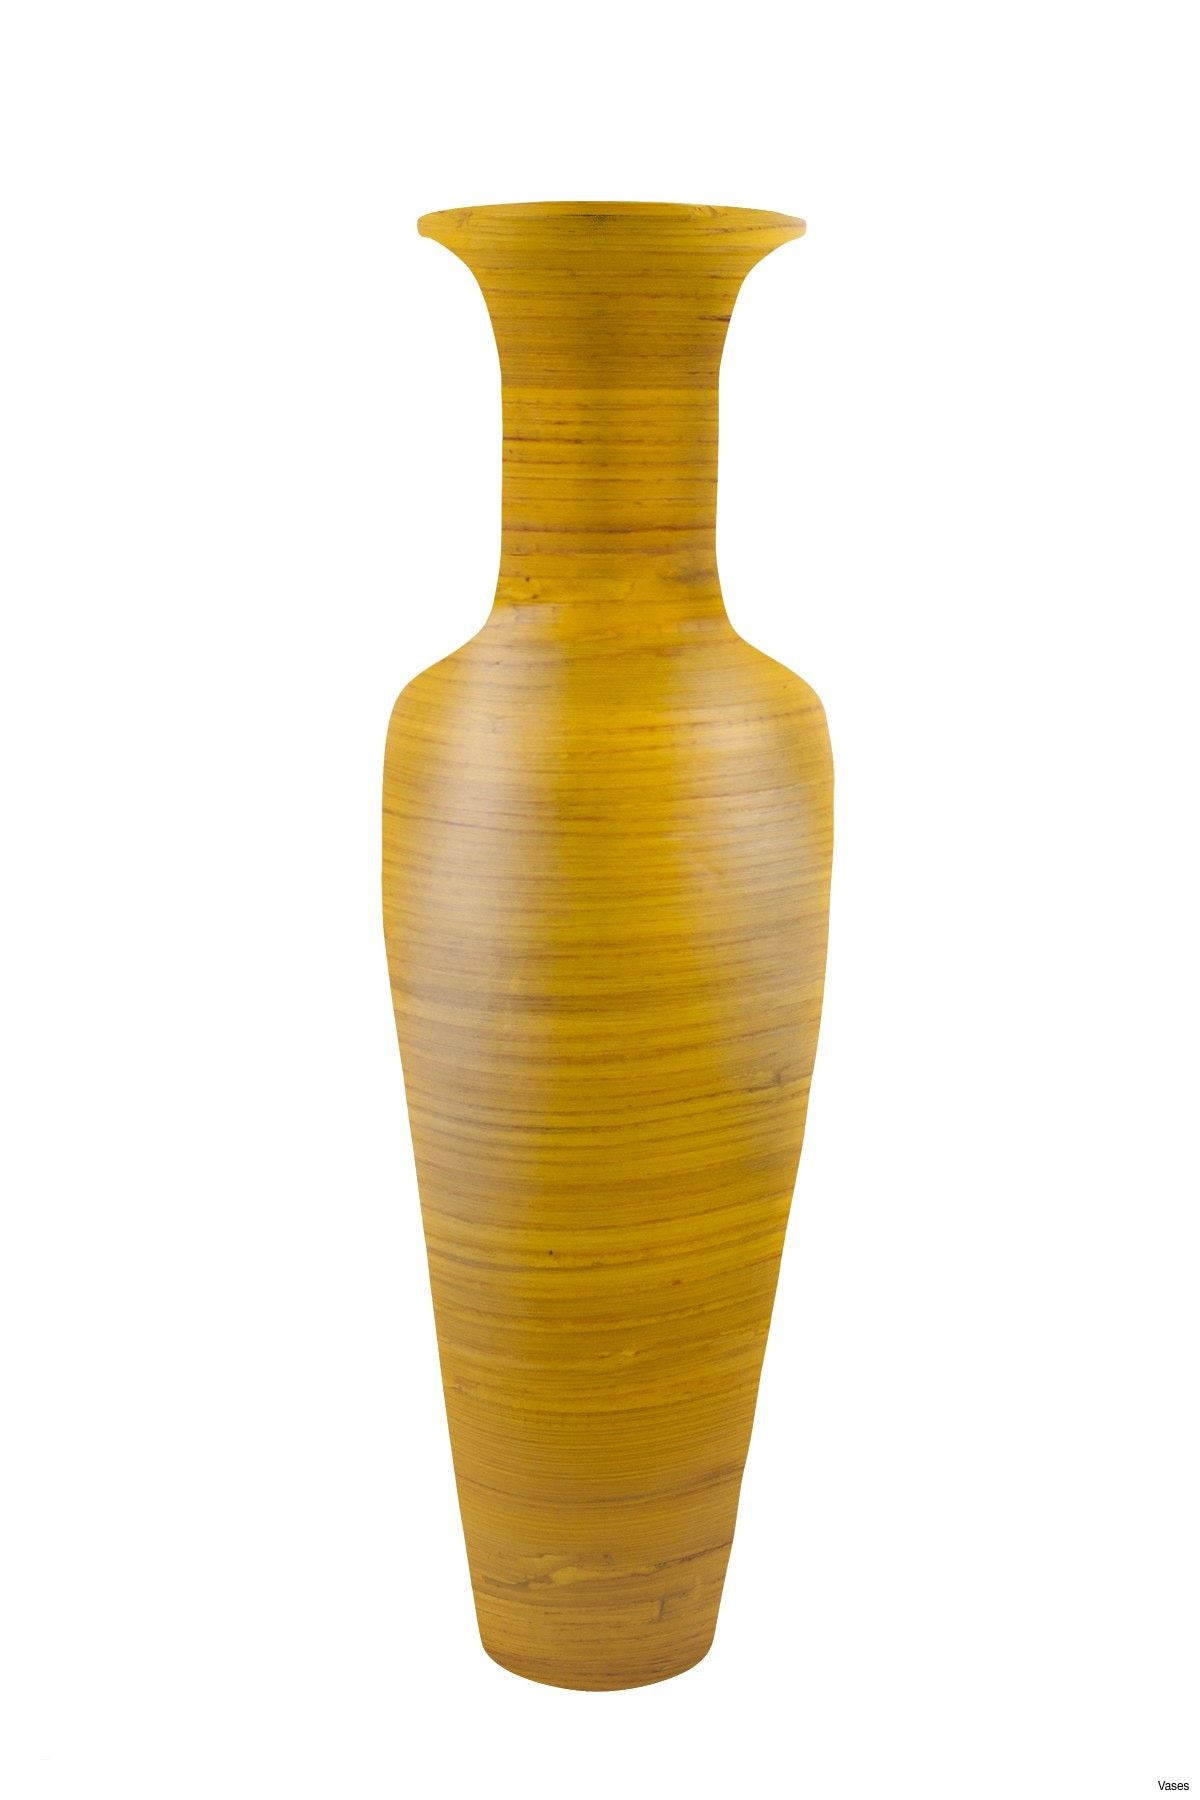 36 Inch Bamboo Tall Floor Vase Of Tall Red Floor Vase Inspirational Vases for Living Room Unique Big with Regard to Tall Red Floor Vase Inspirational Vases for Living Room Unique Big Vases for Living Room Extra